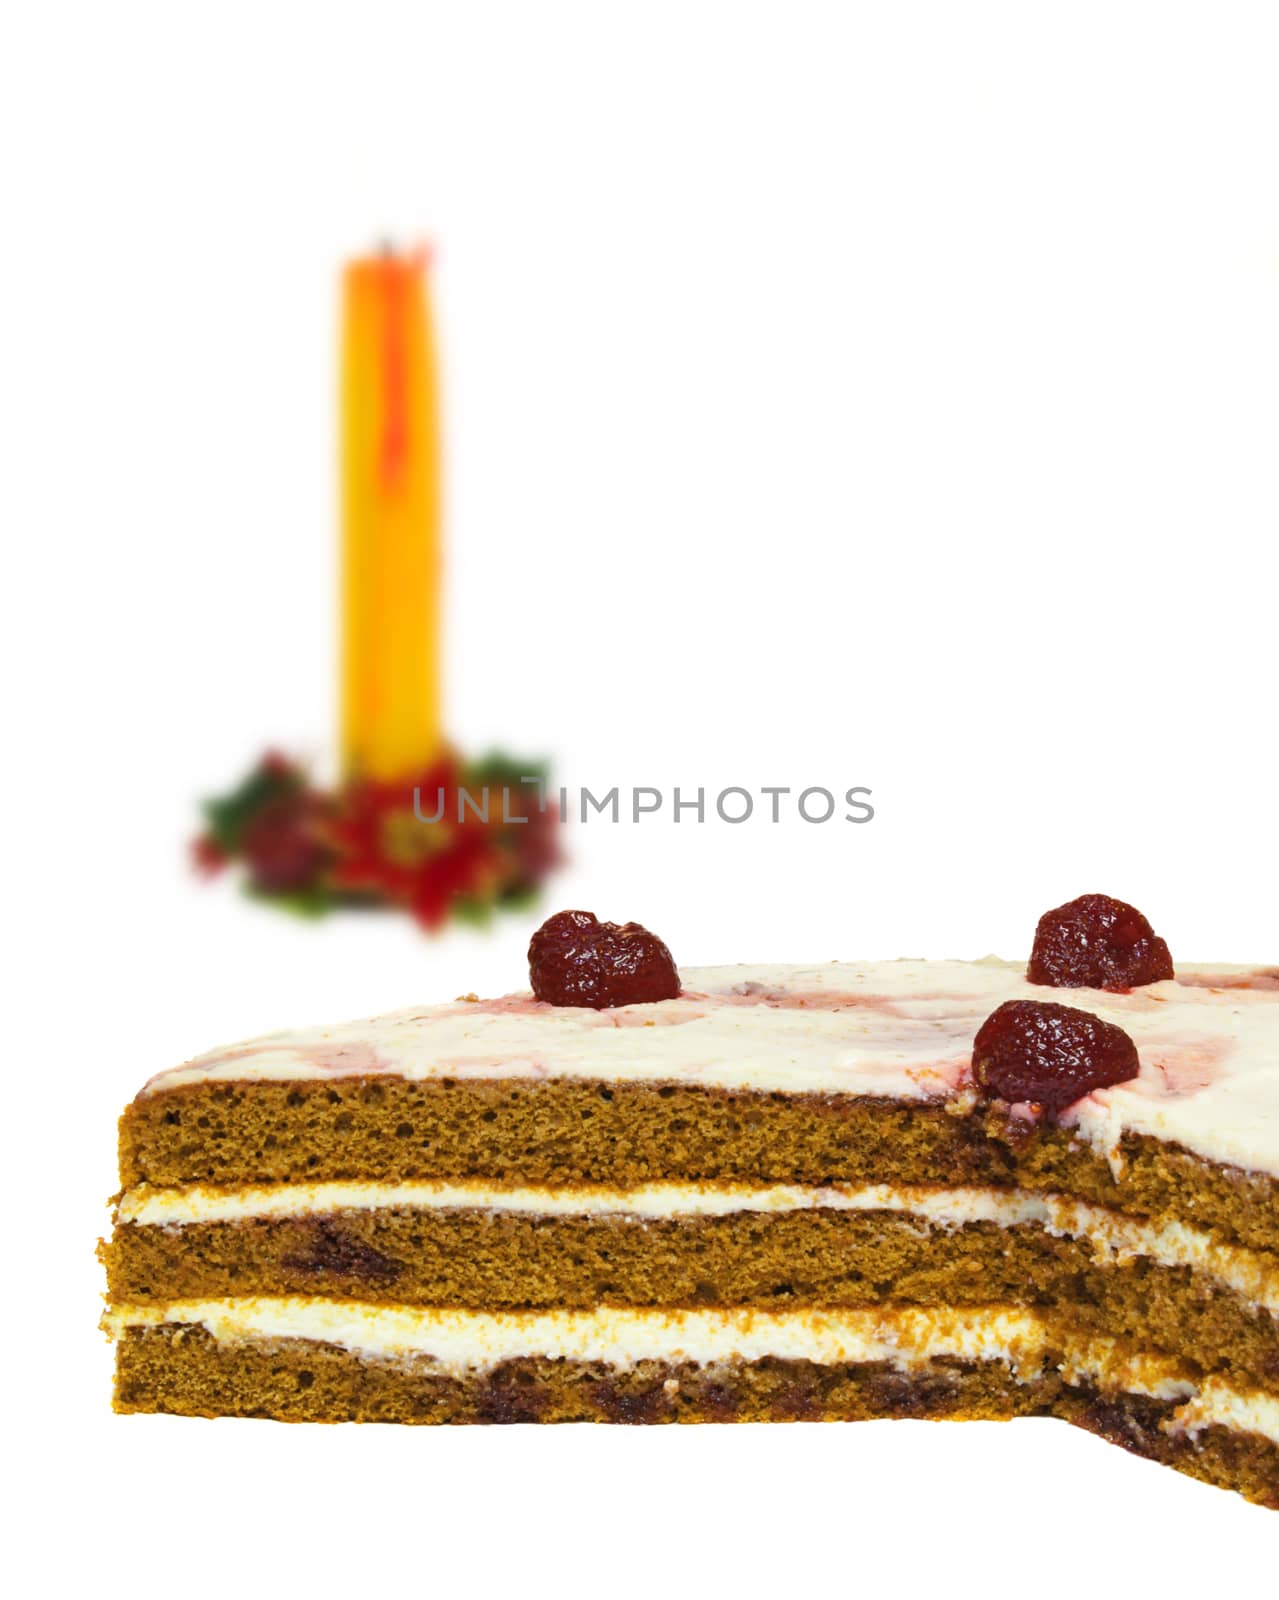 Sponge cake and candle wax by Grommik